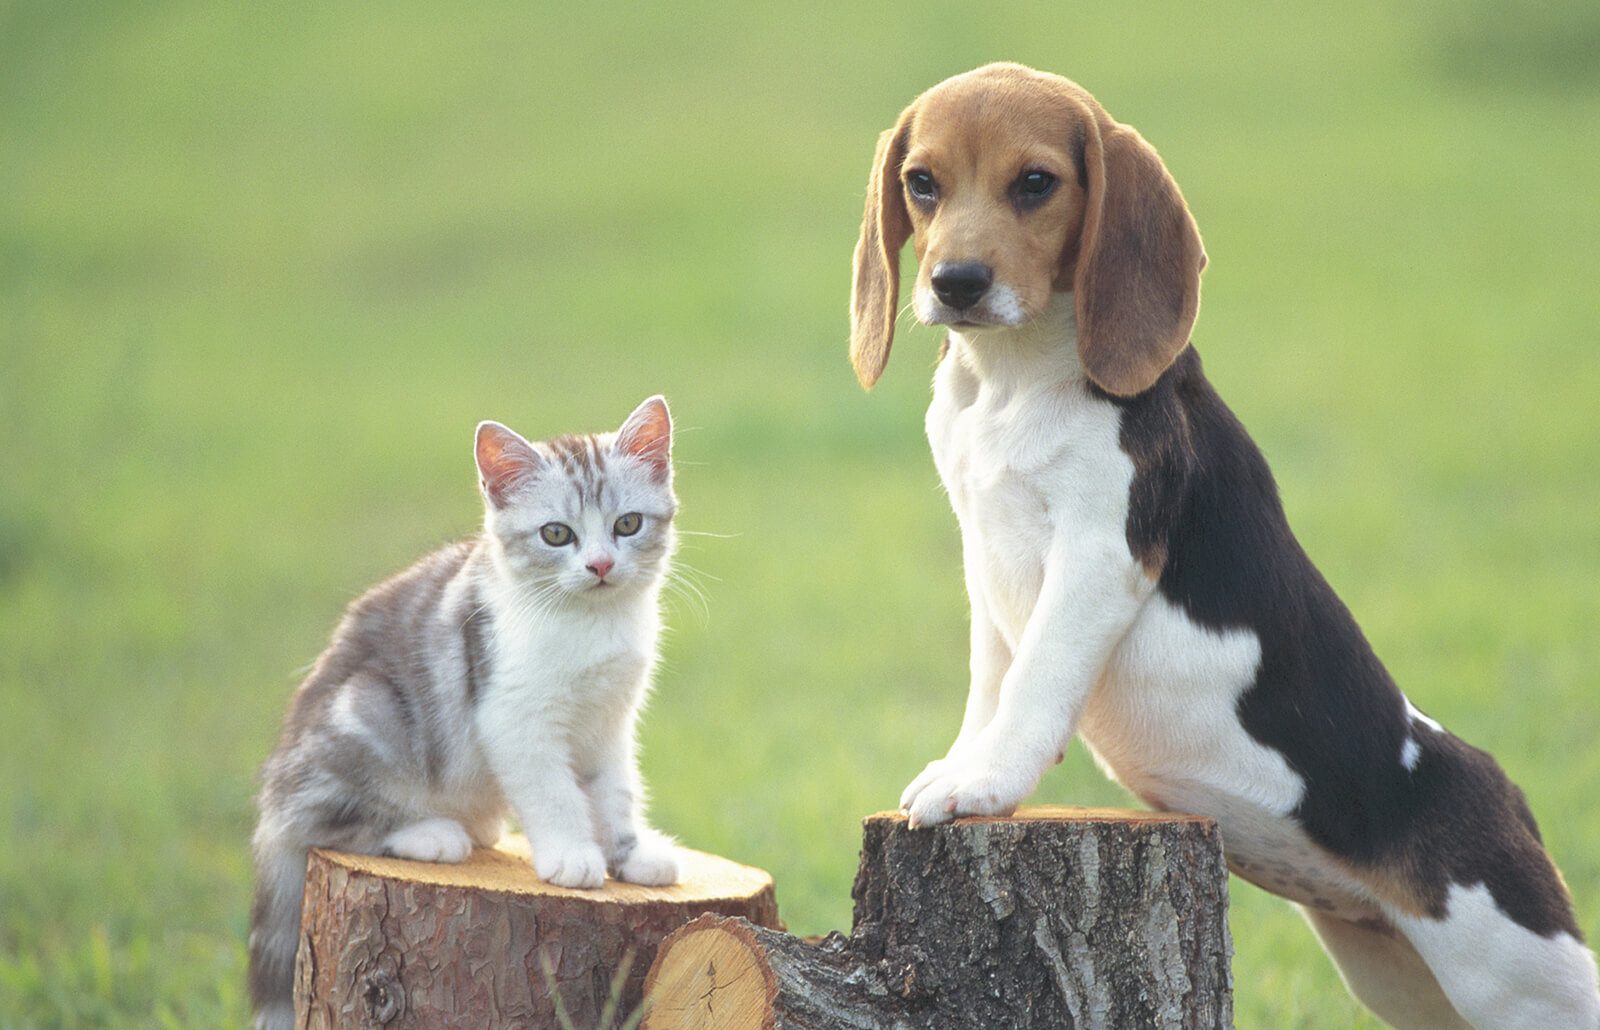 Why Dogs Make Better Pet Than Cats